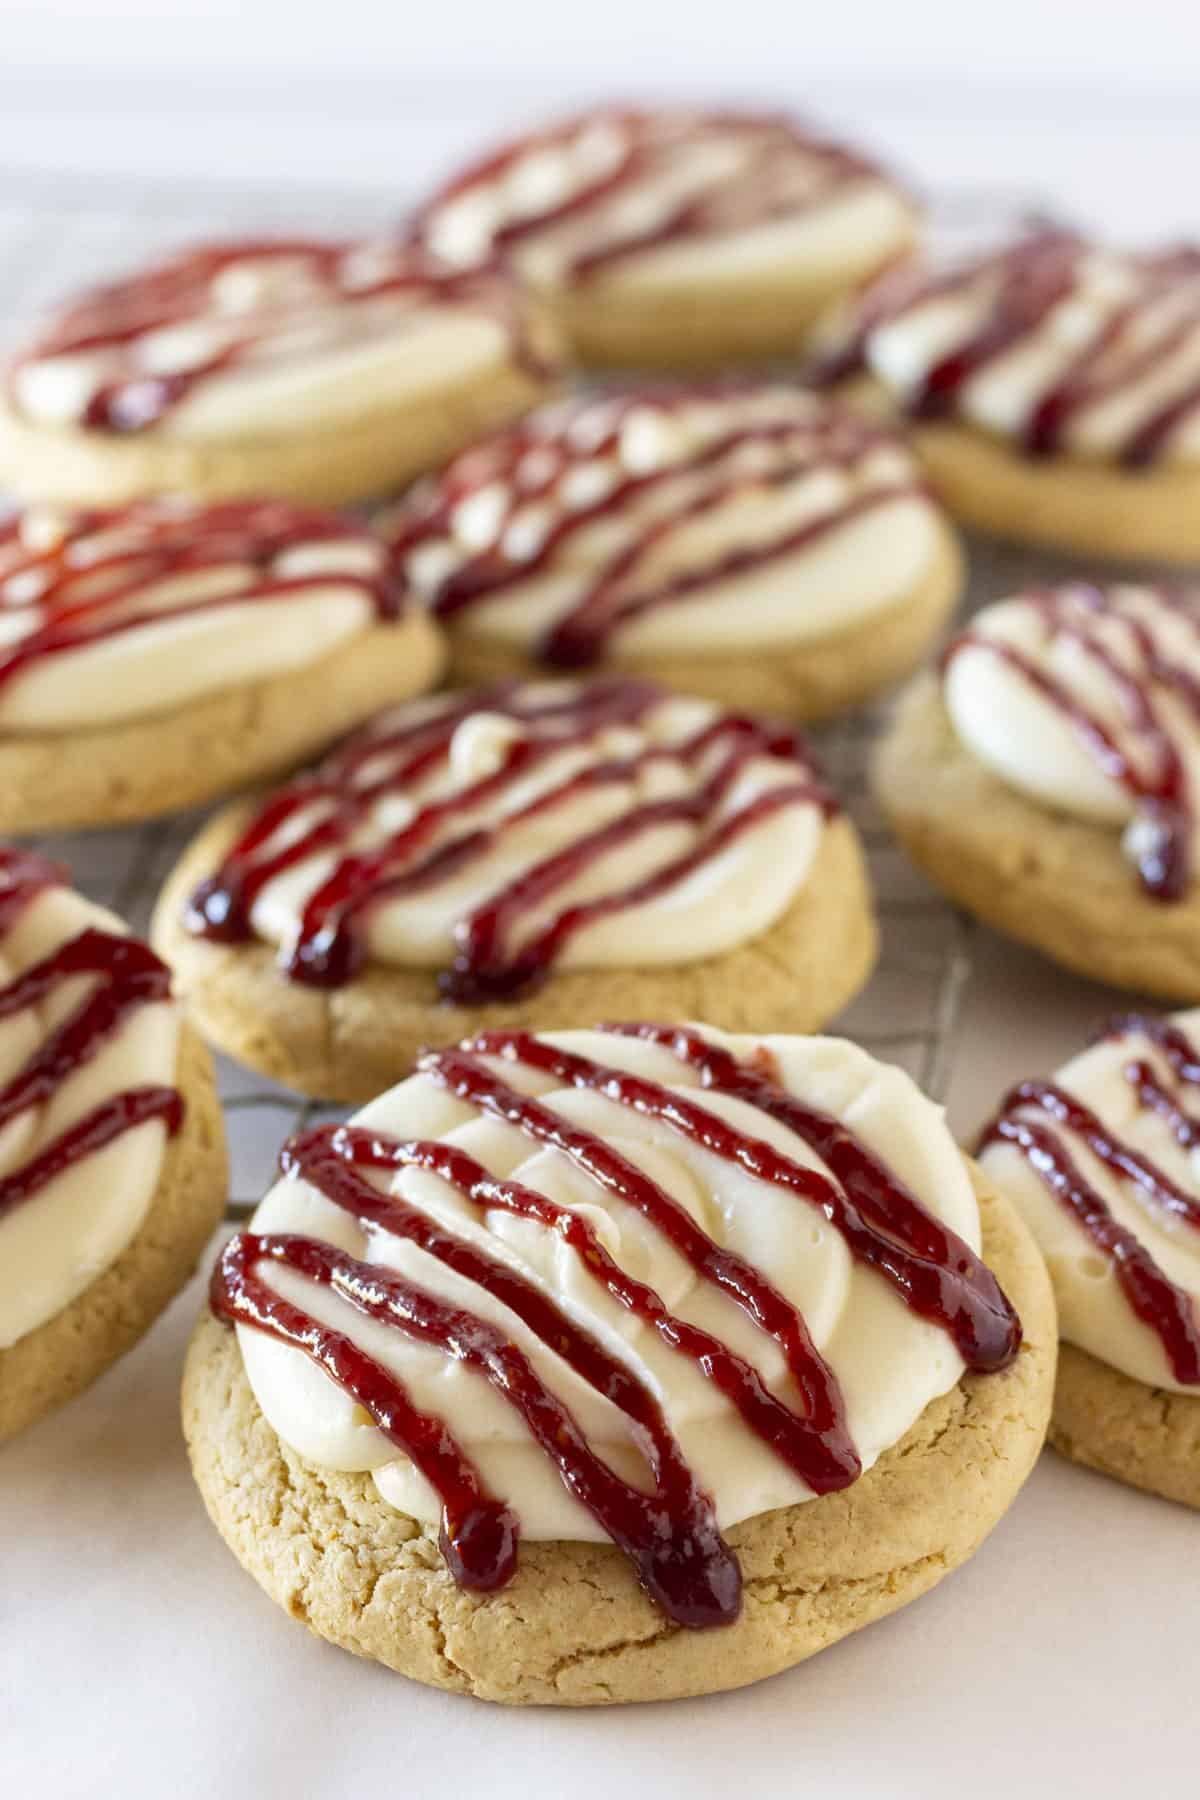 Crumbl Copycat Raspberry Cheesecake Cookies made with a cake mix